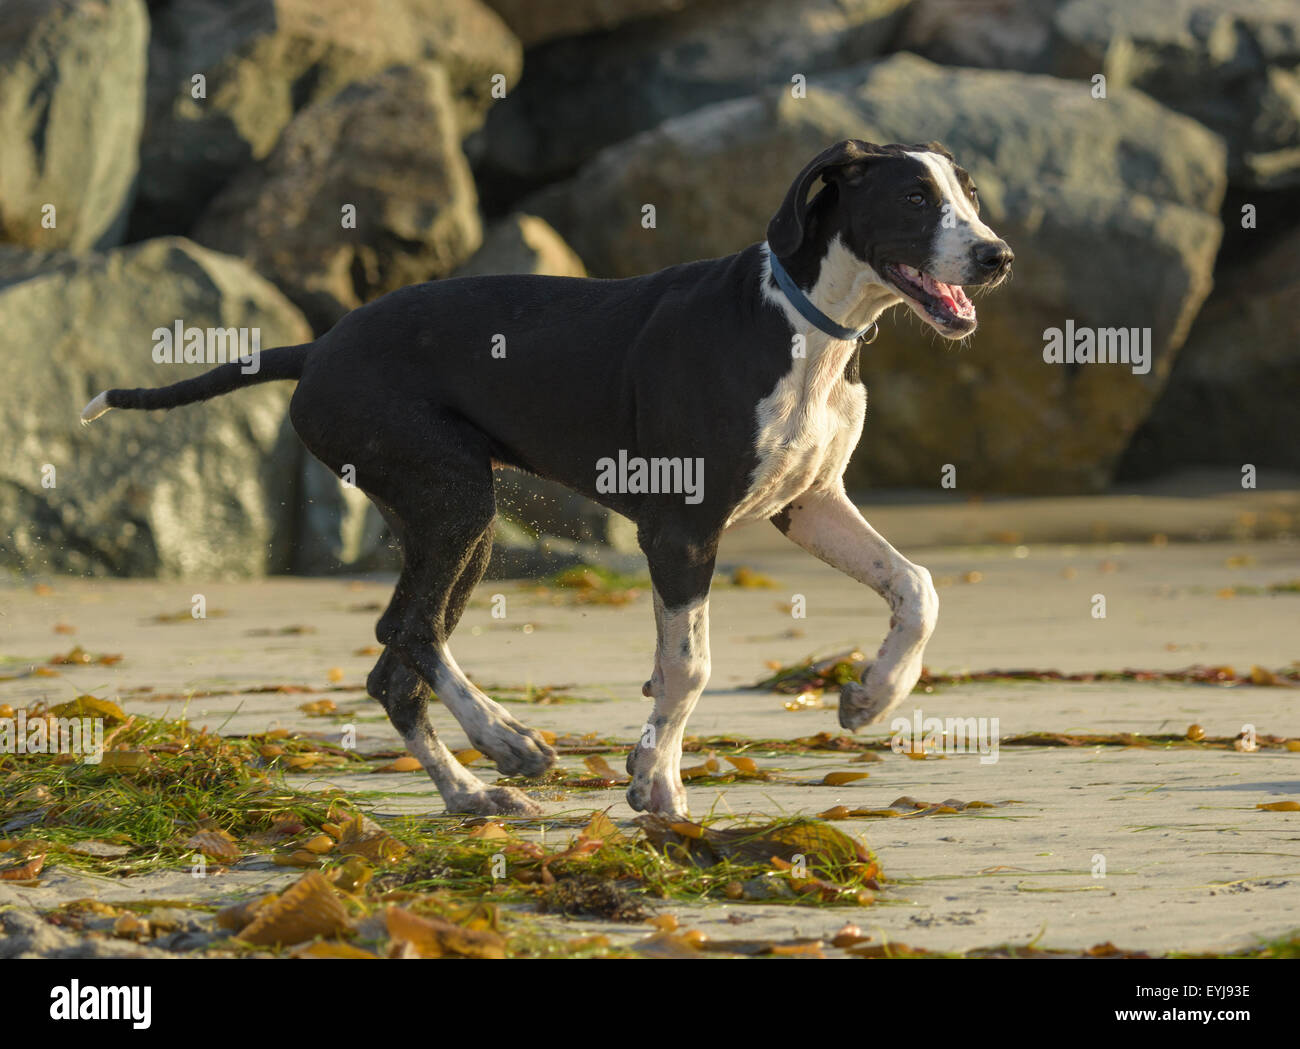 Dog running on ocean shore with rocks behind Stock Photo